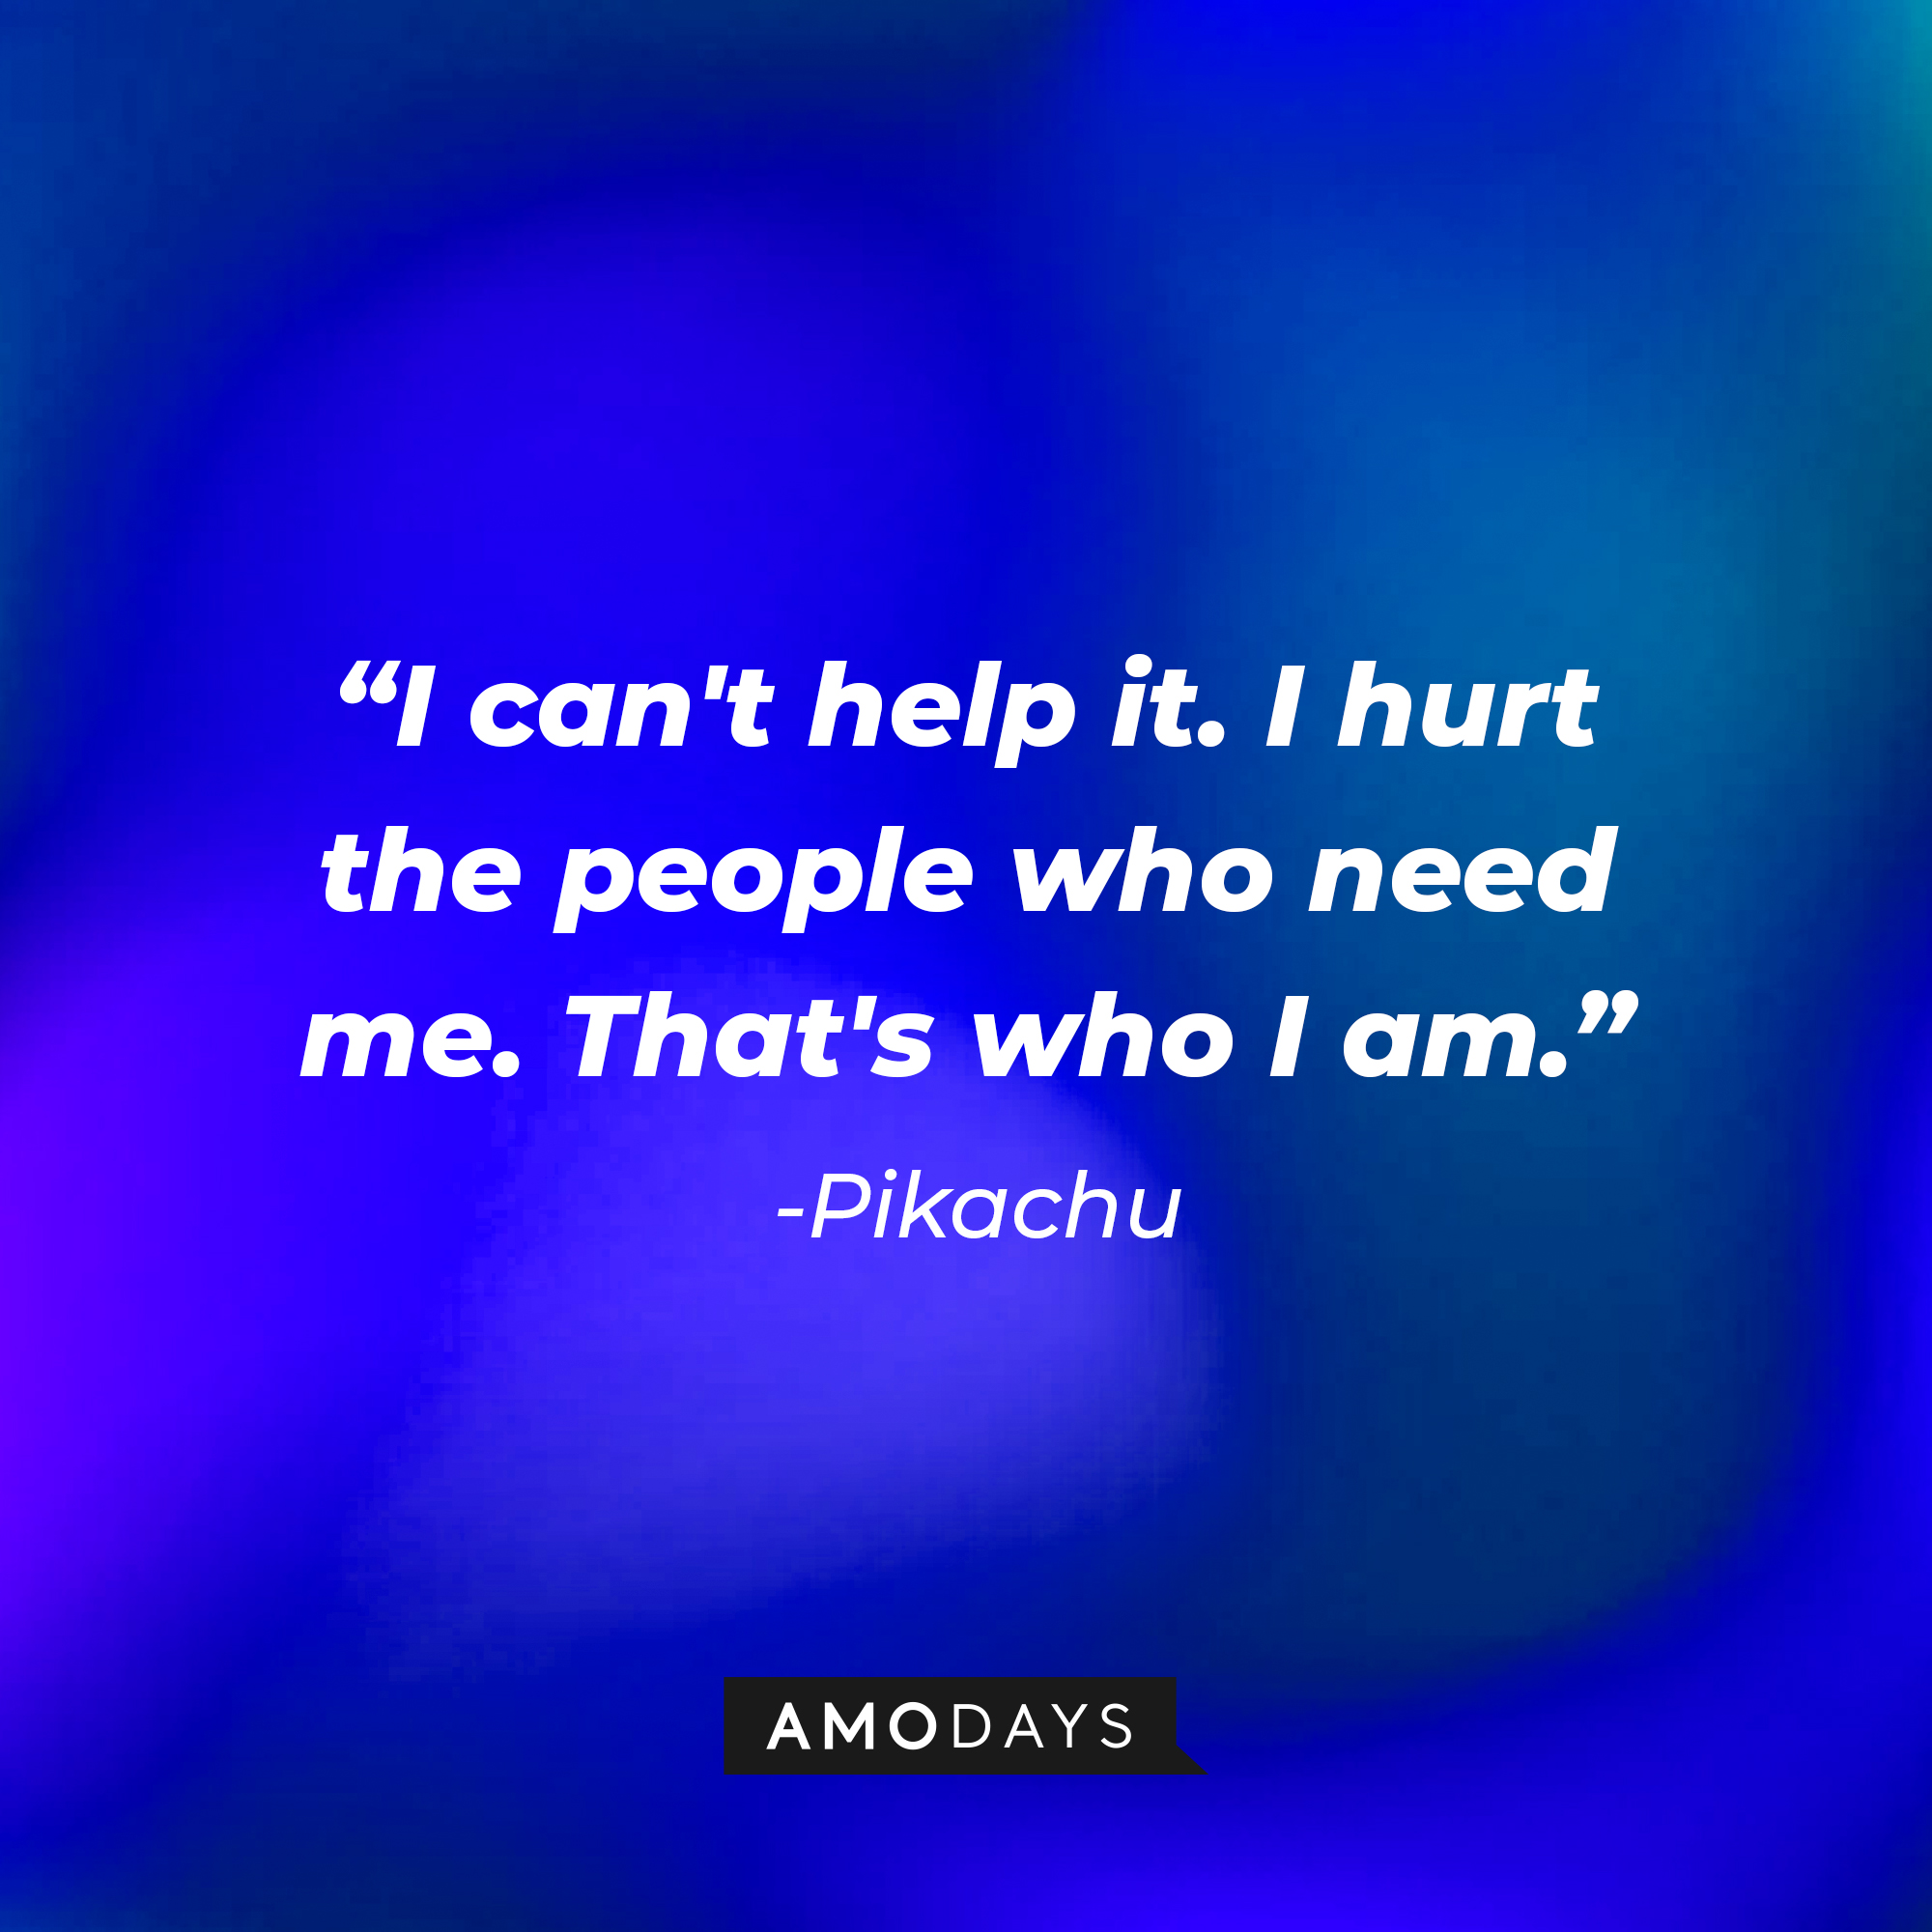 Pikachu's quote: "I can't help it. I hurt the people who need me. That's who I am." | Source: AmoDays